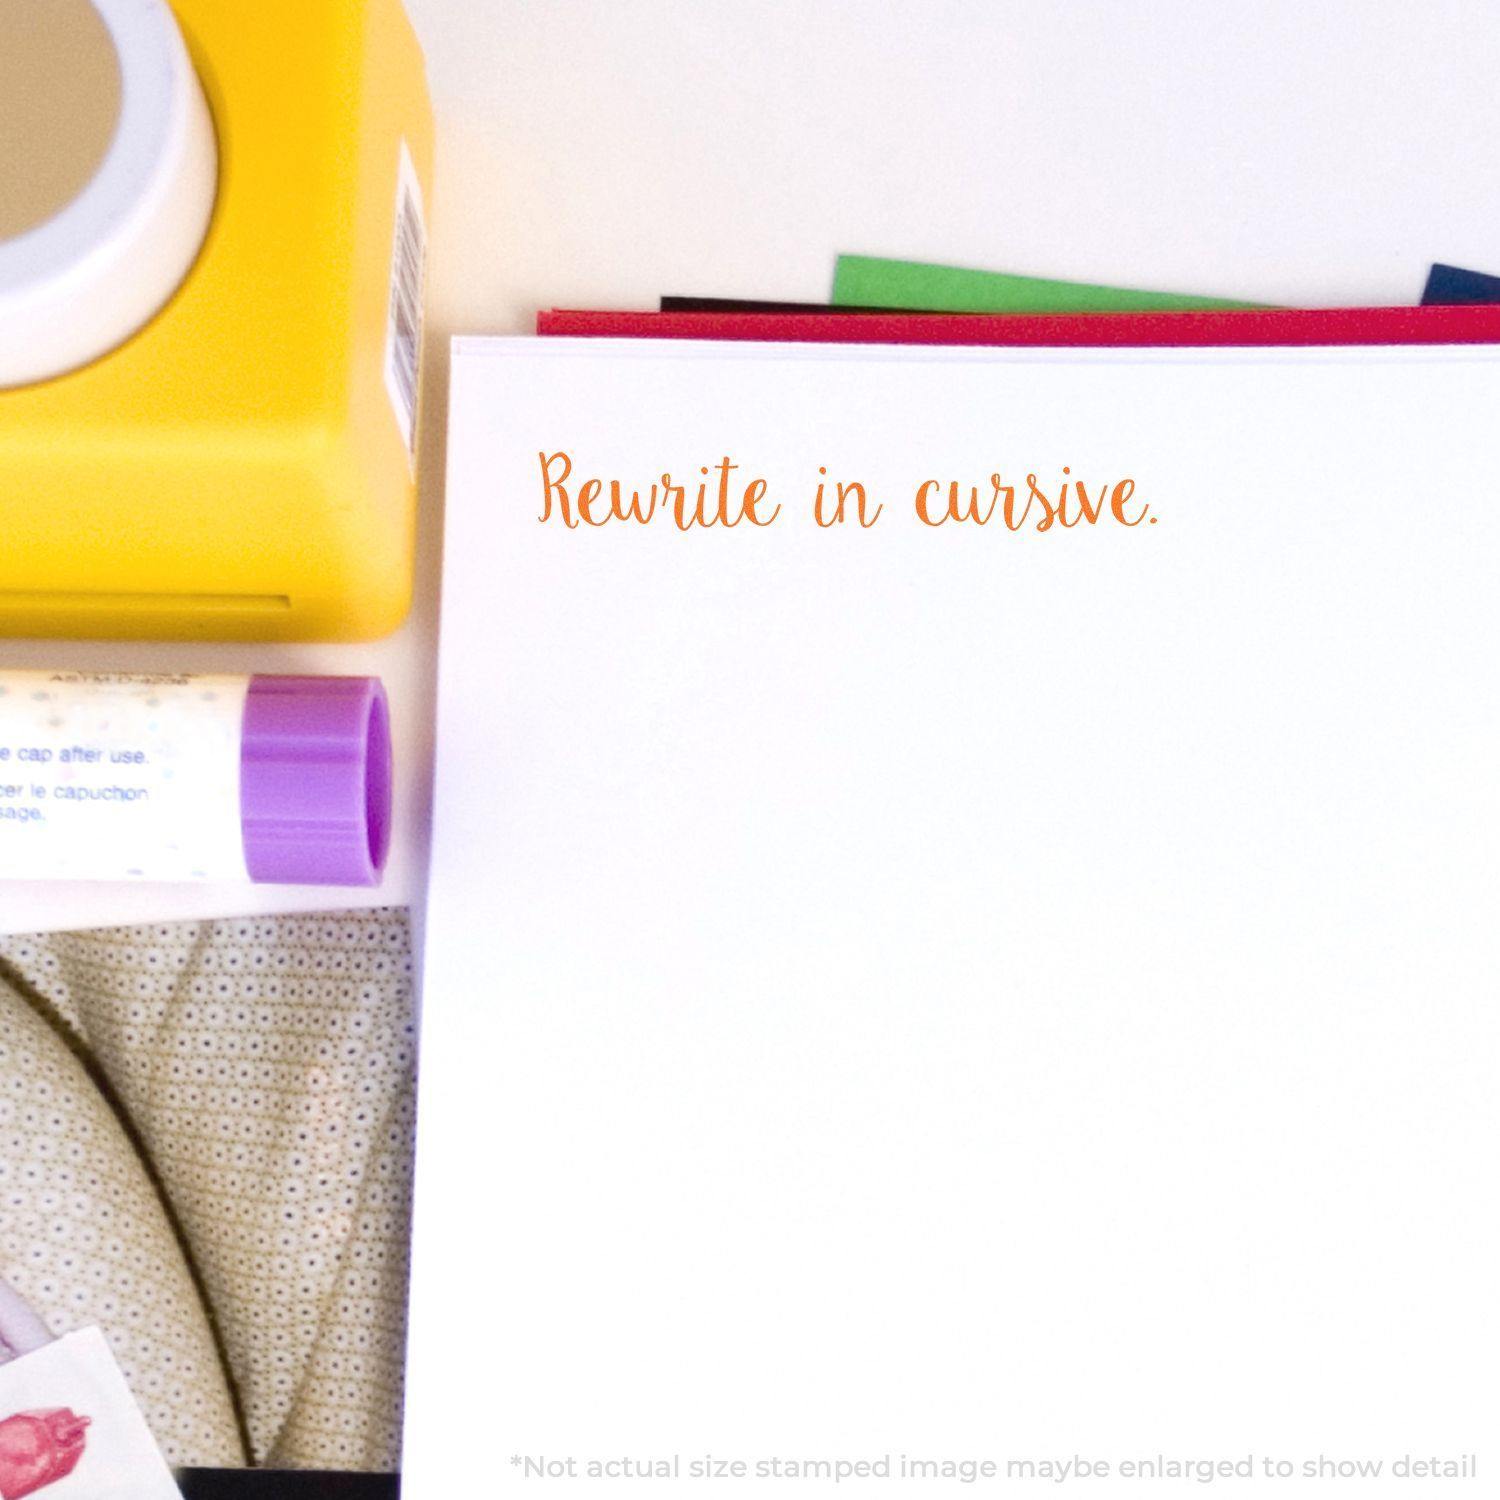 A stock office rubber stamp with a stamped image showing how the text "Rewrite in cursive." in a large script cursive font is displayed after stamping.